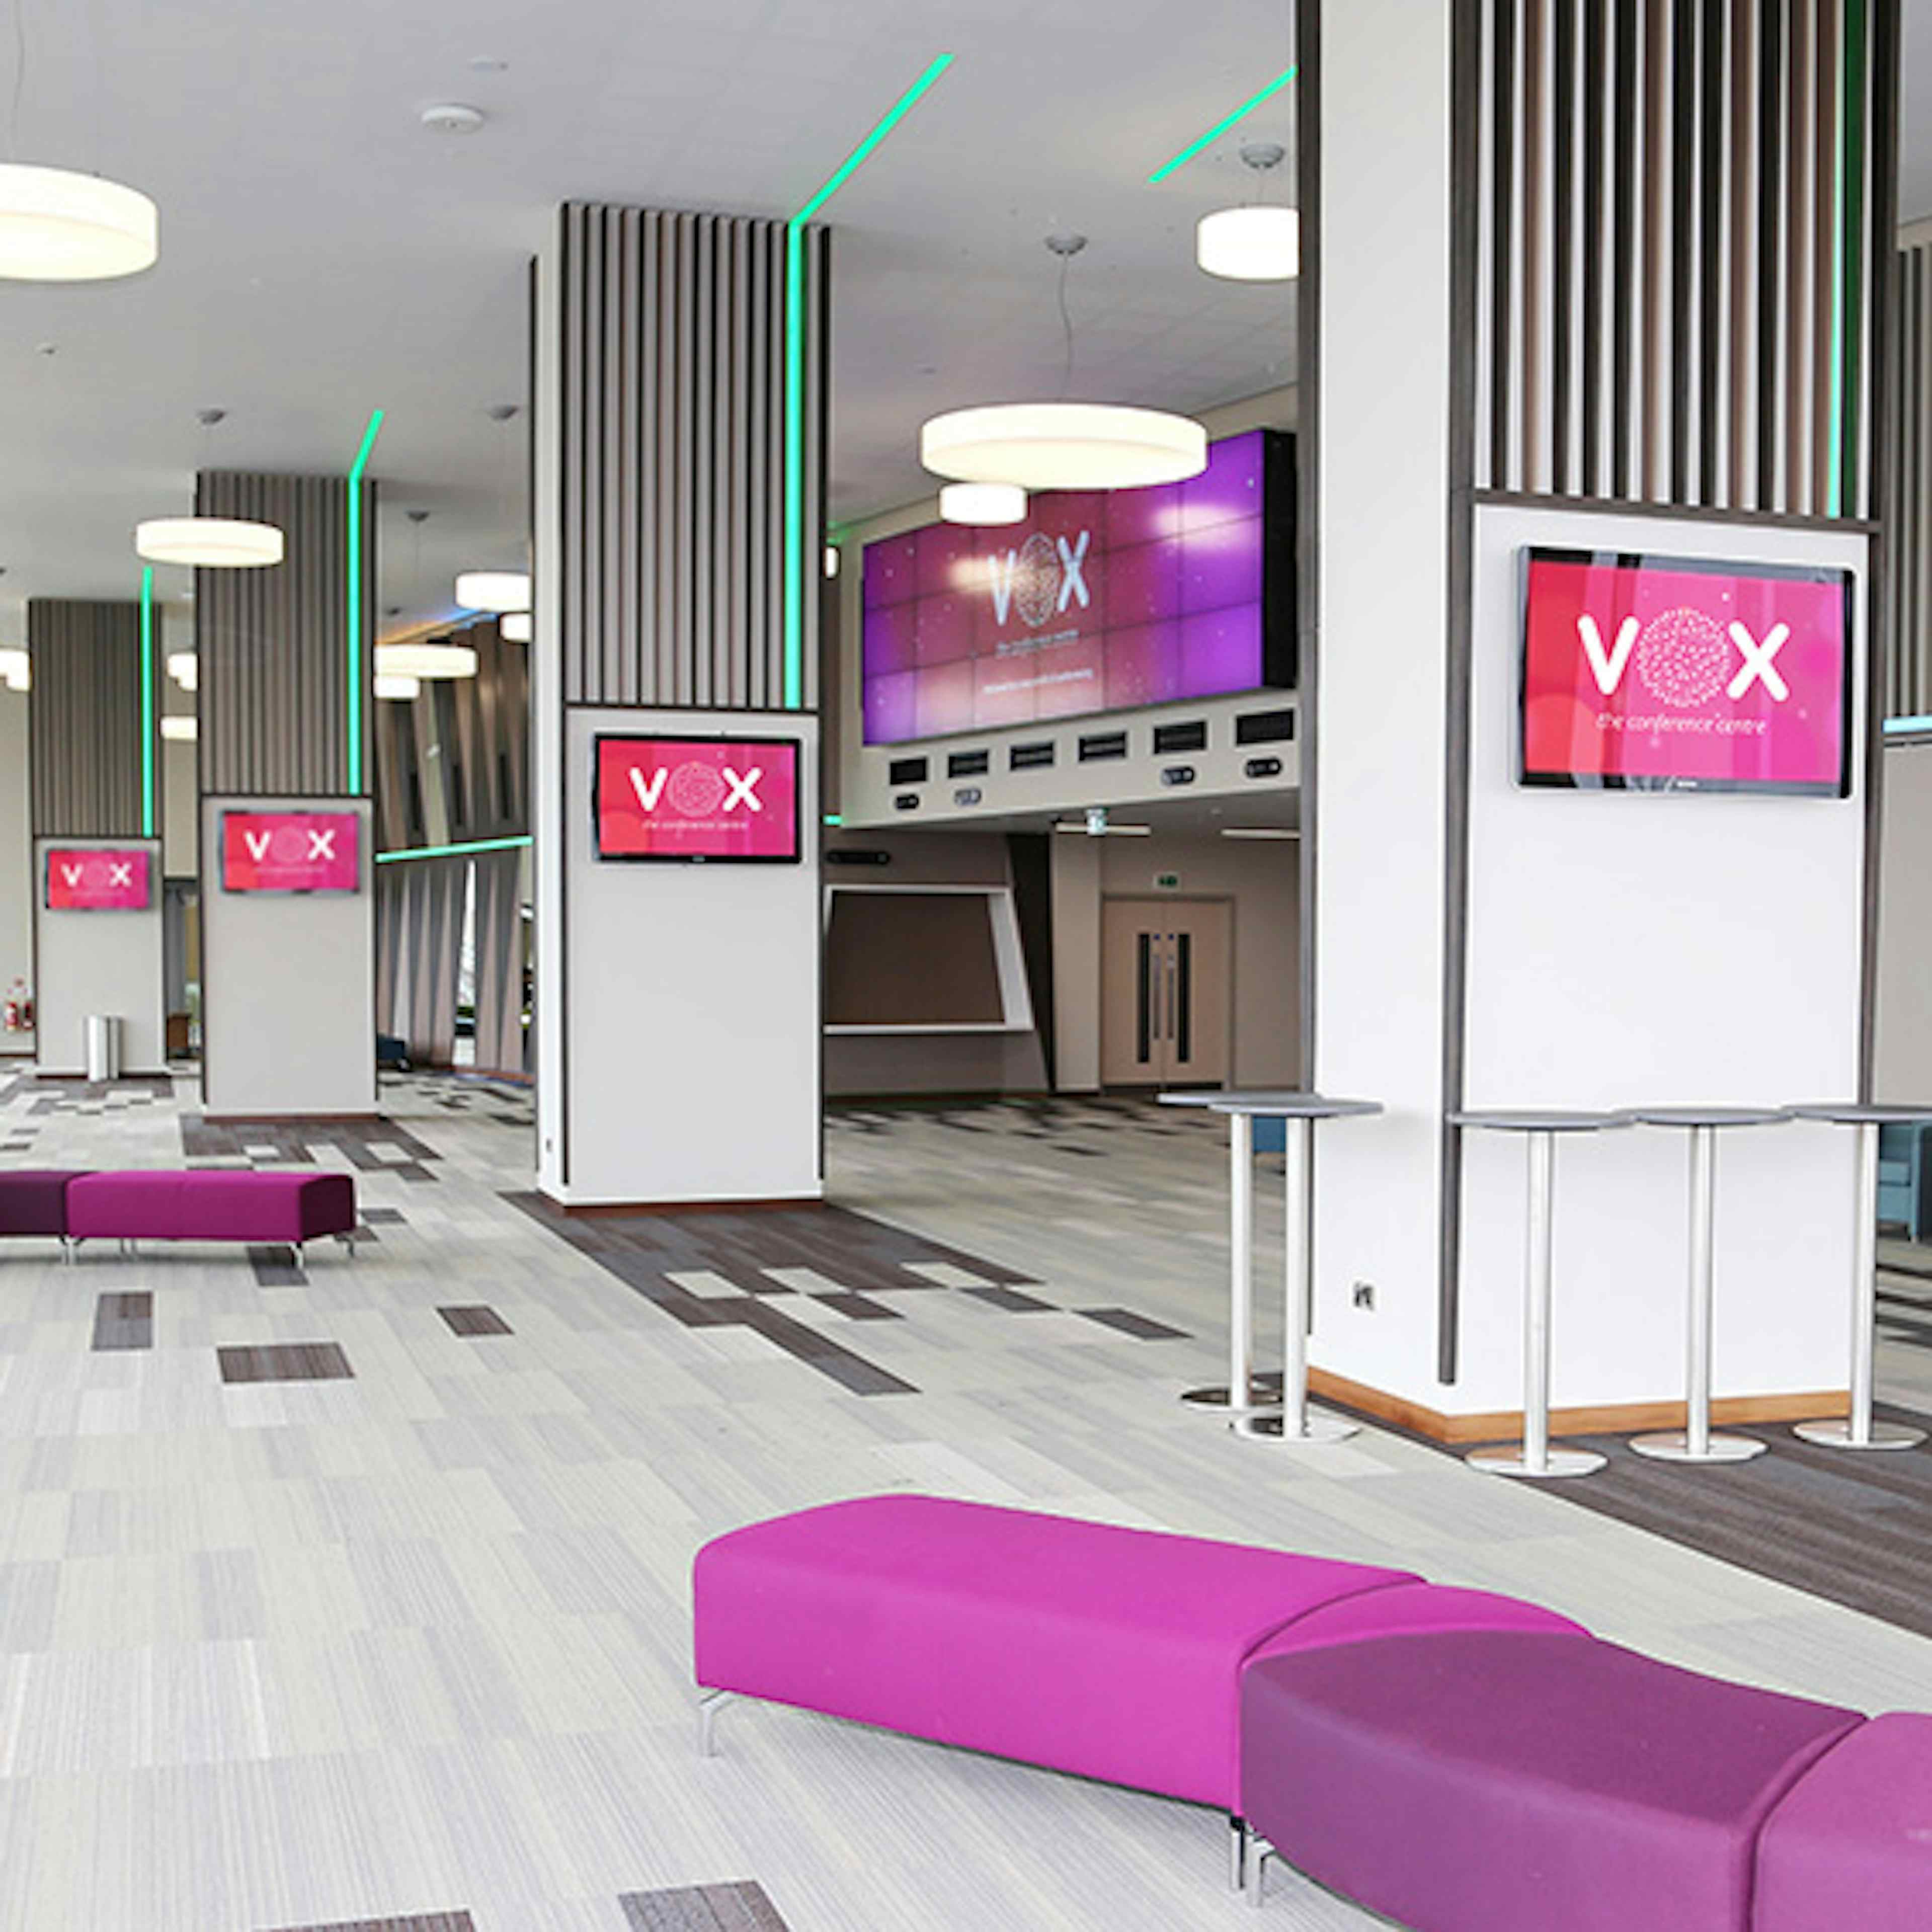 The Vox Conference Centre - Vox 3 4 5  image 3